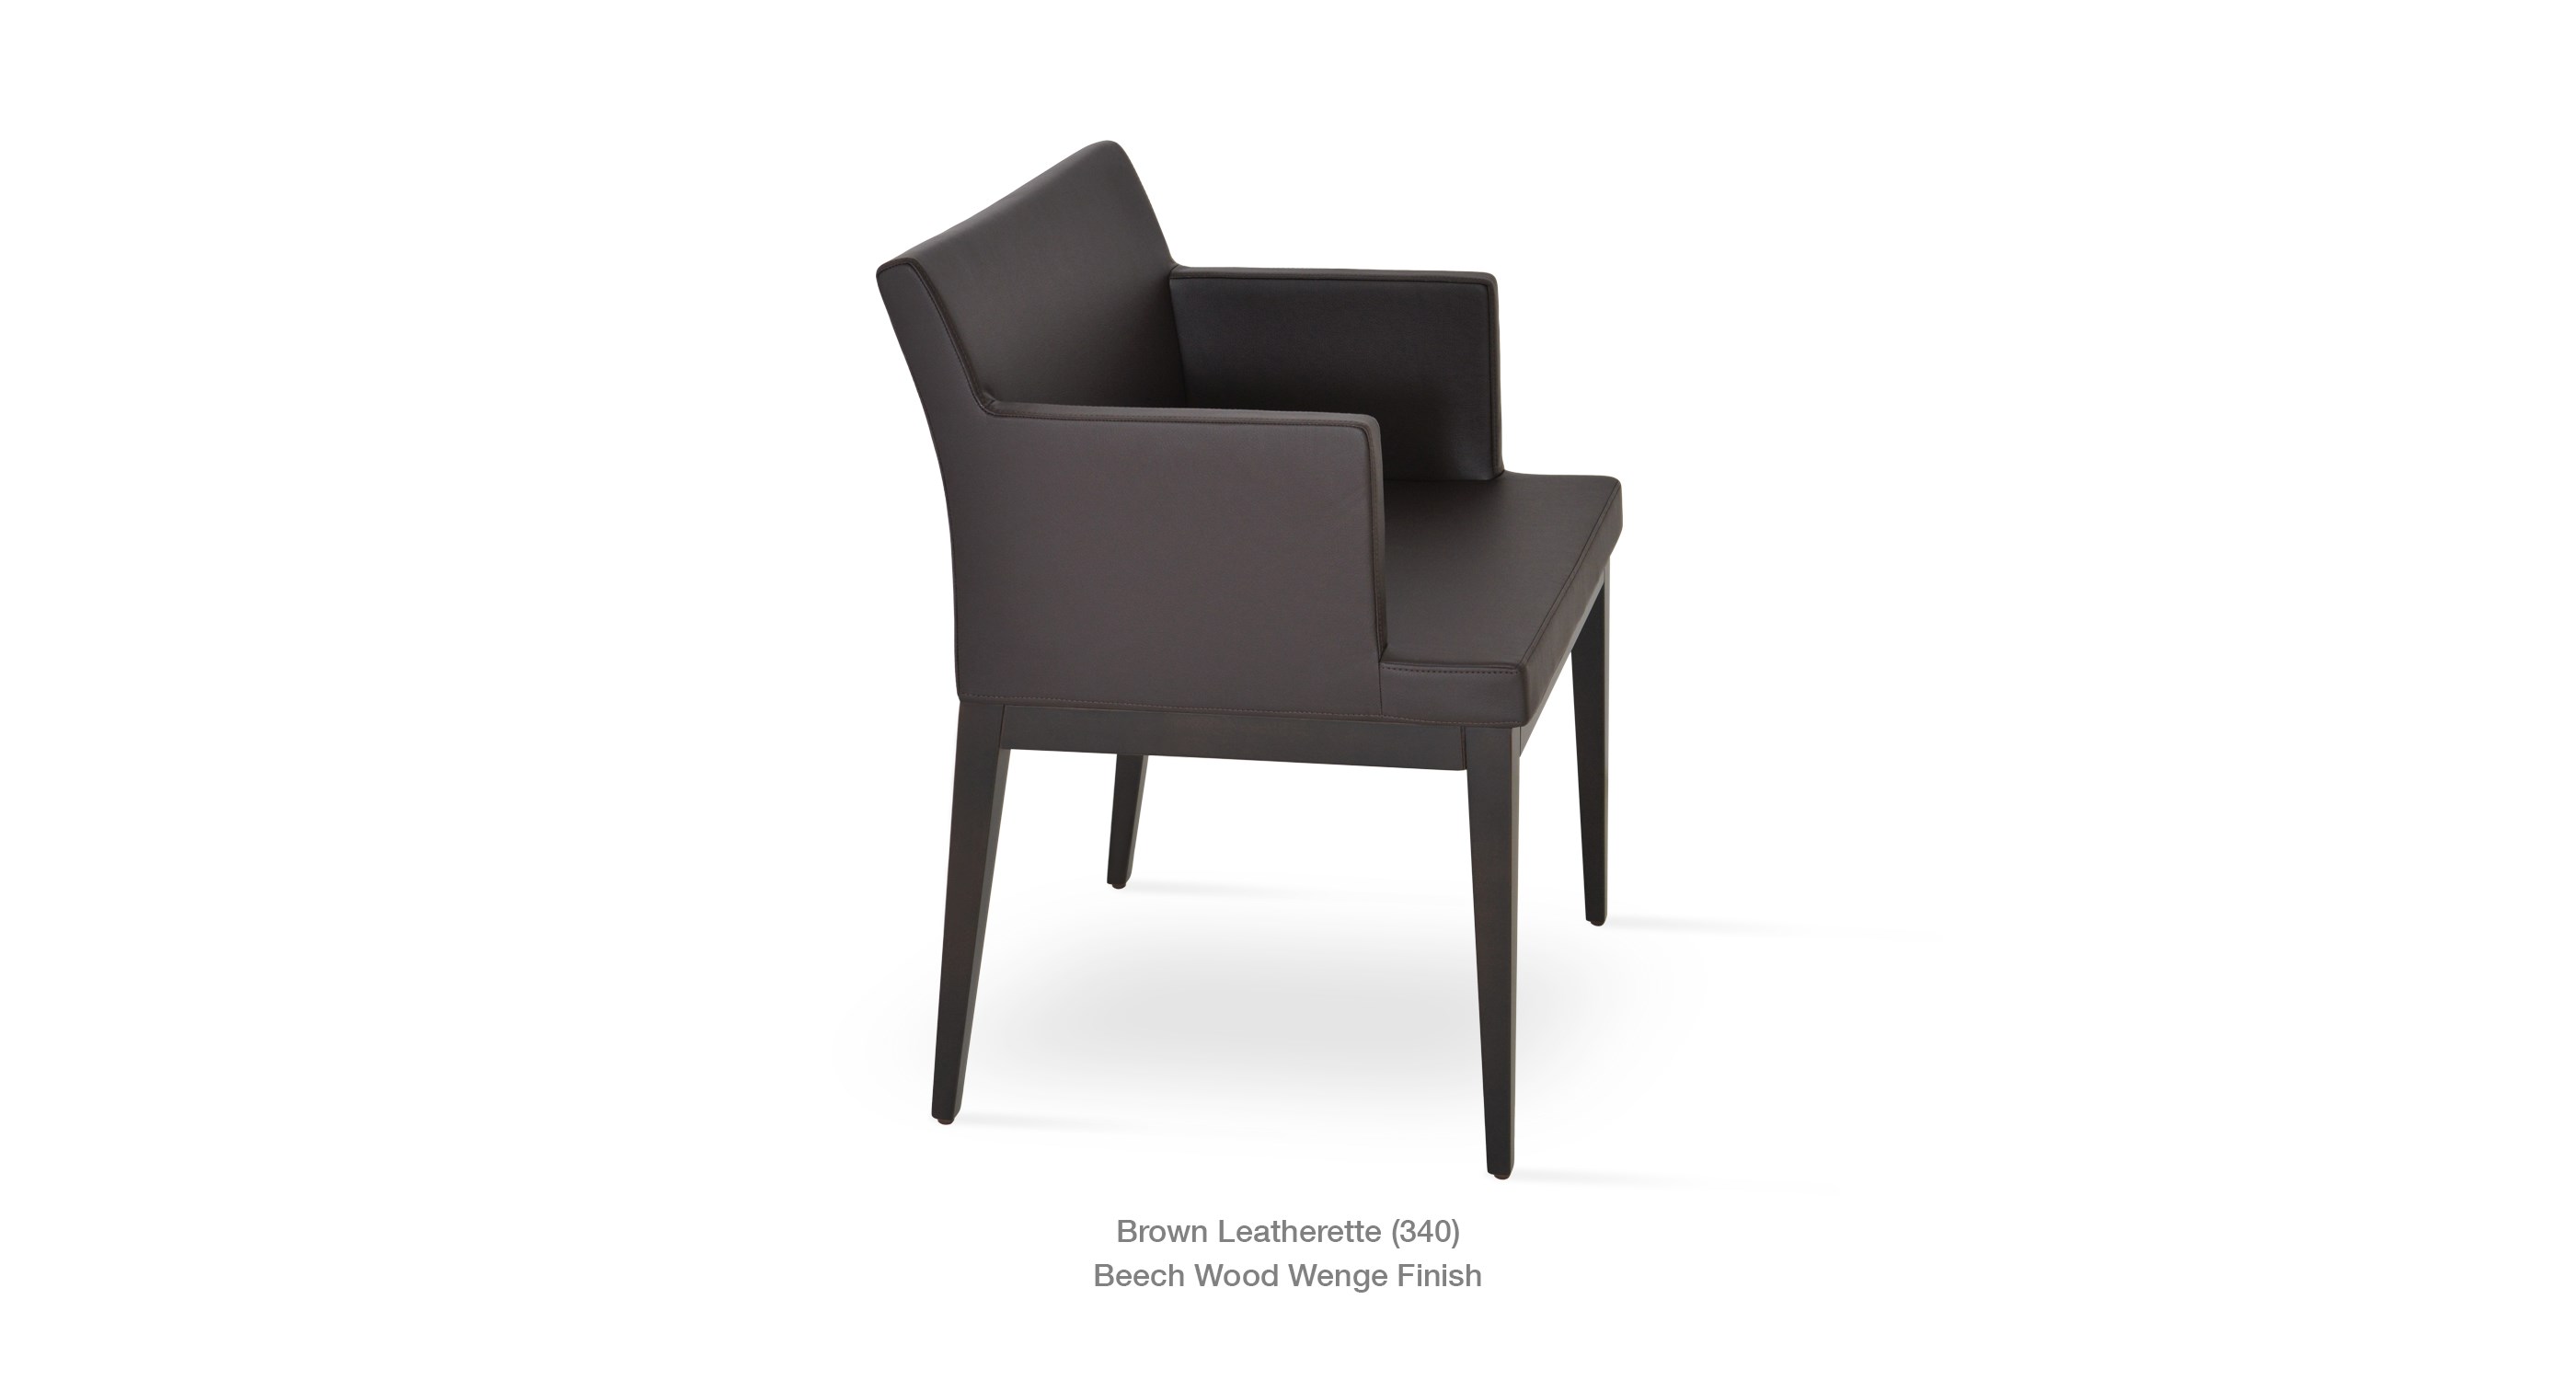 SOHO Office Chair, High-End Leatherette